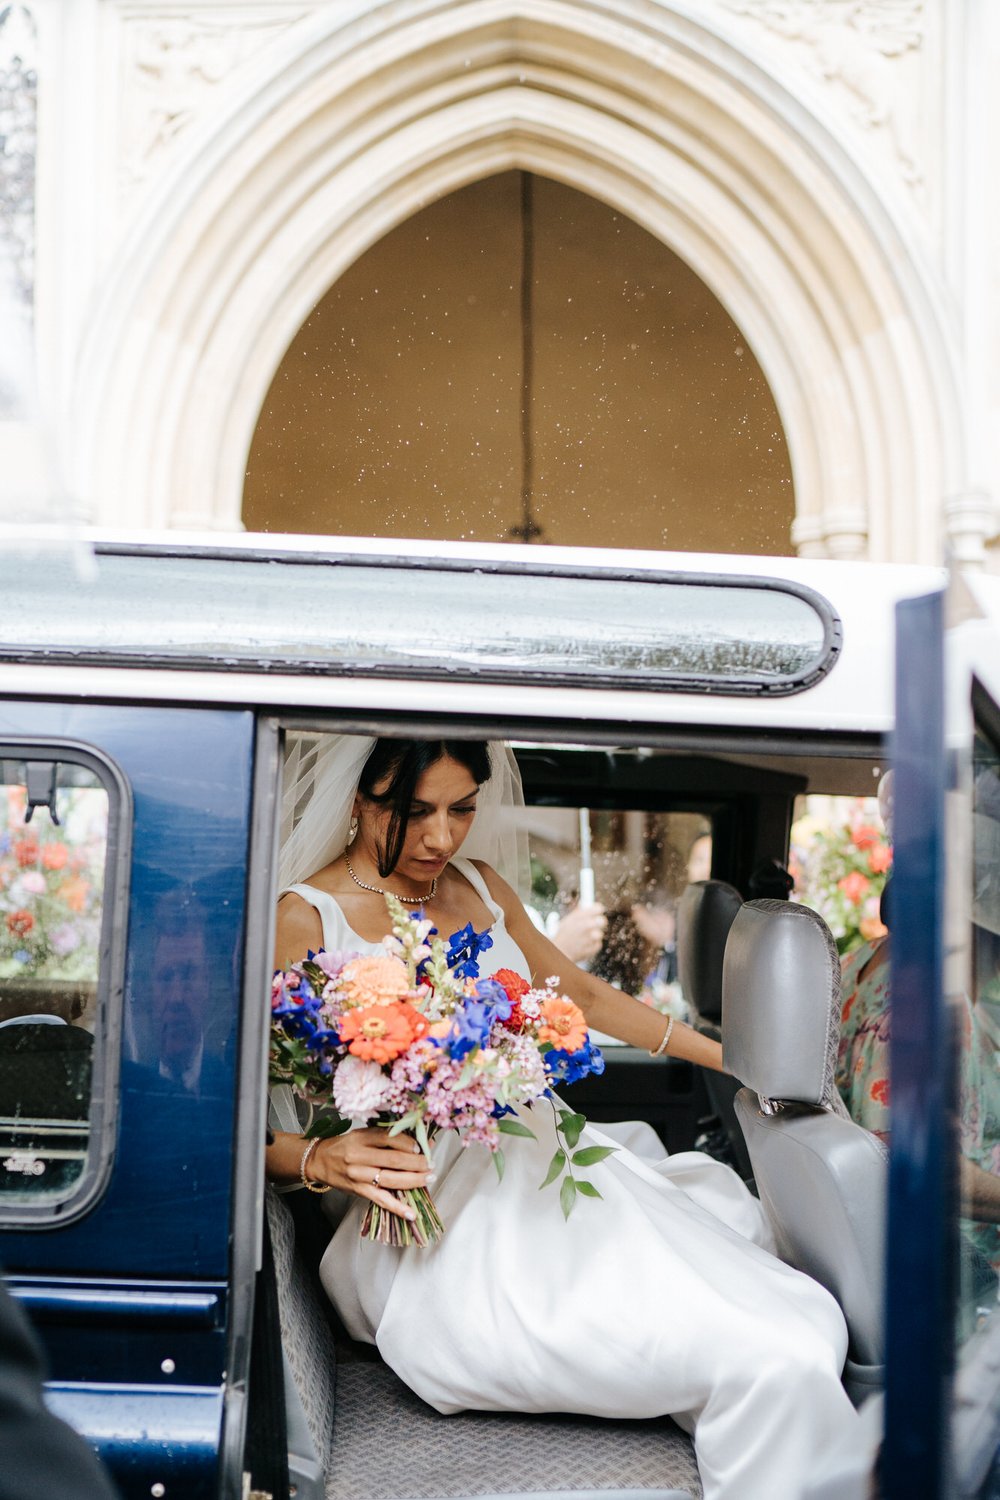 Bride arrives at church in Land Rover Defender and is seen exiting the vehile as rain drops pelt the rooftop